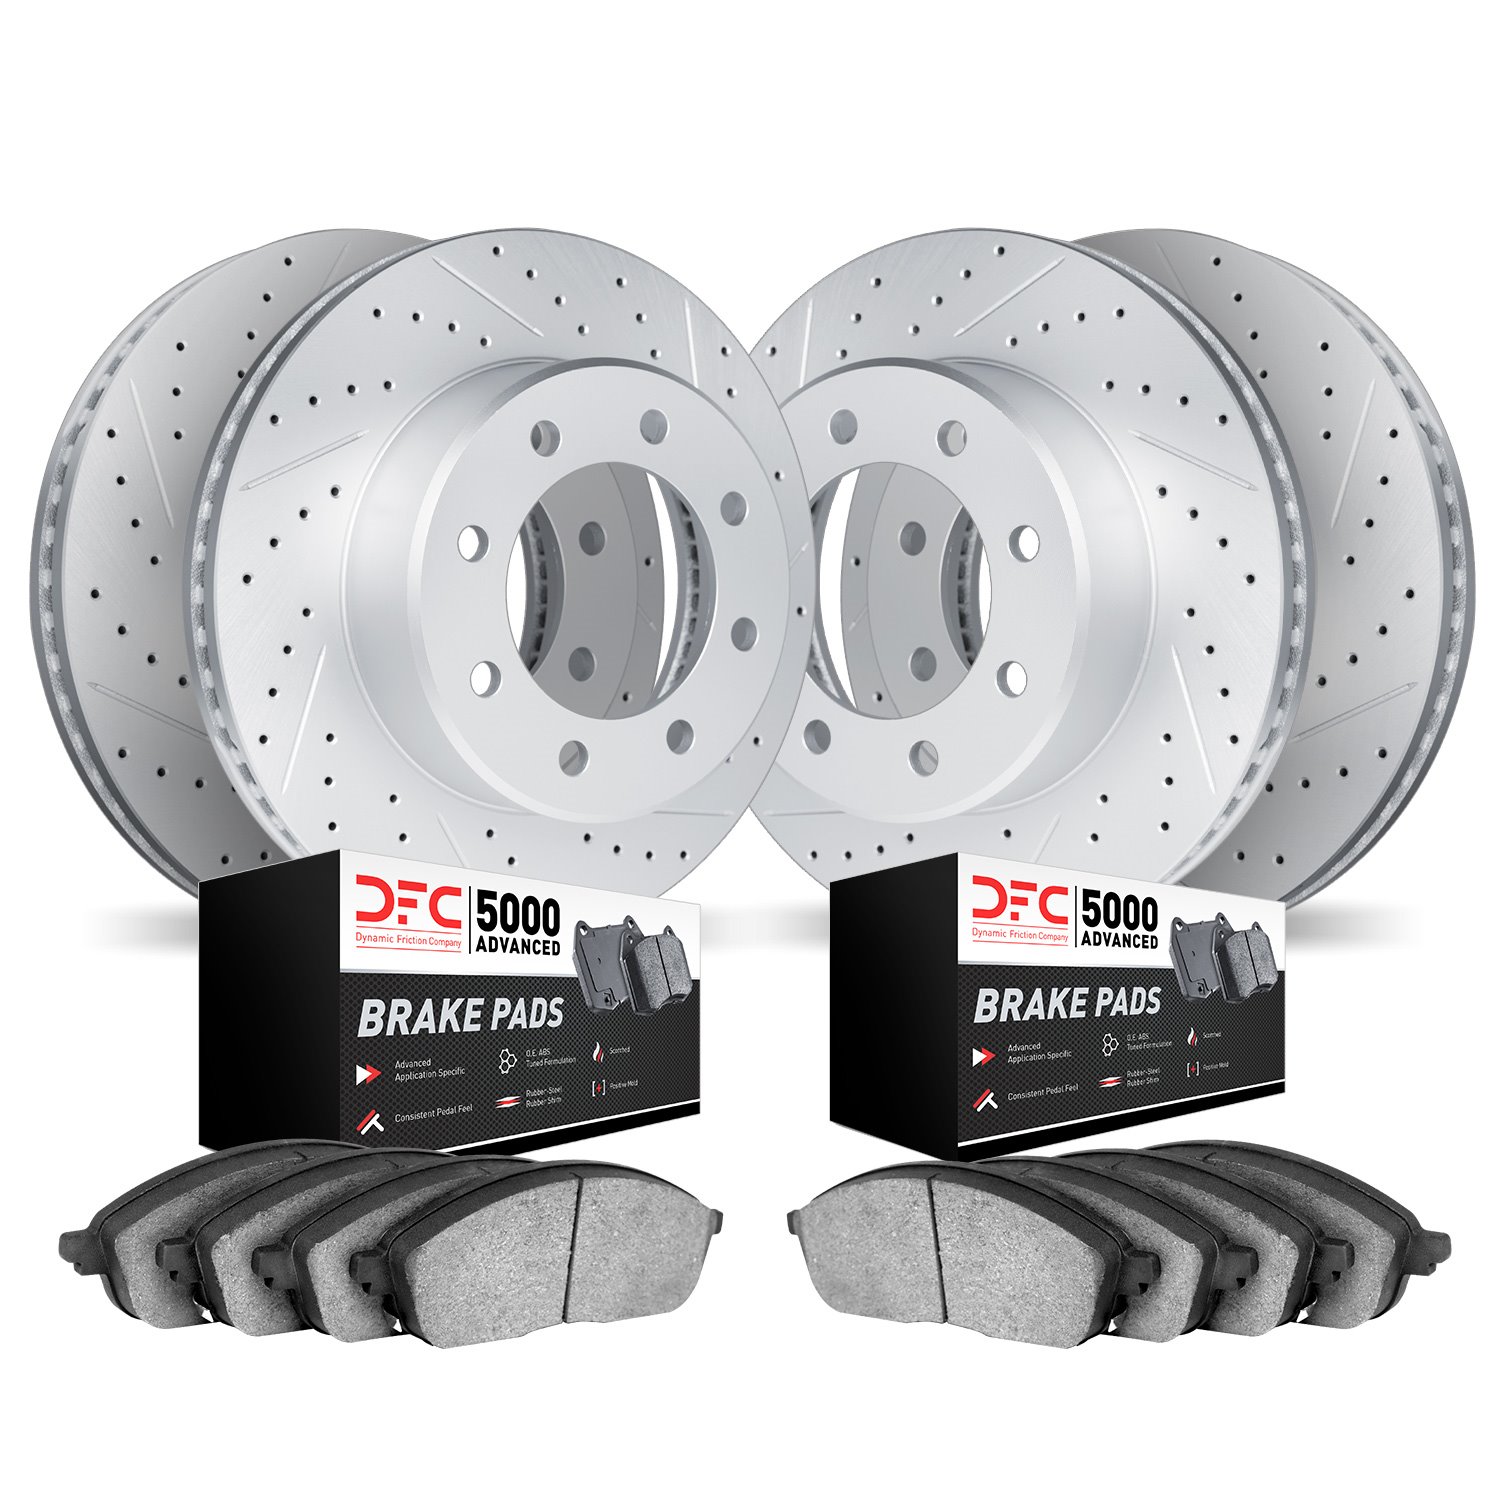 2504-54284 Geoperformance Drilled/Slotted Rotors w/5000 Advanced Brake Pads Kit, 2005-2007 Ford/Lincoln/Mercury/Mazda, Position: